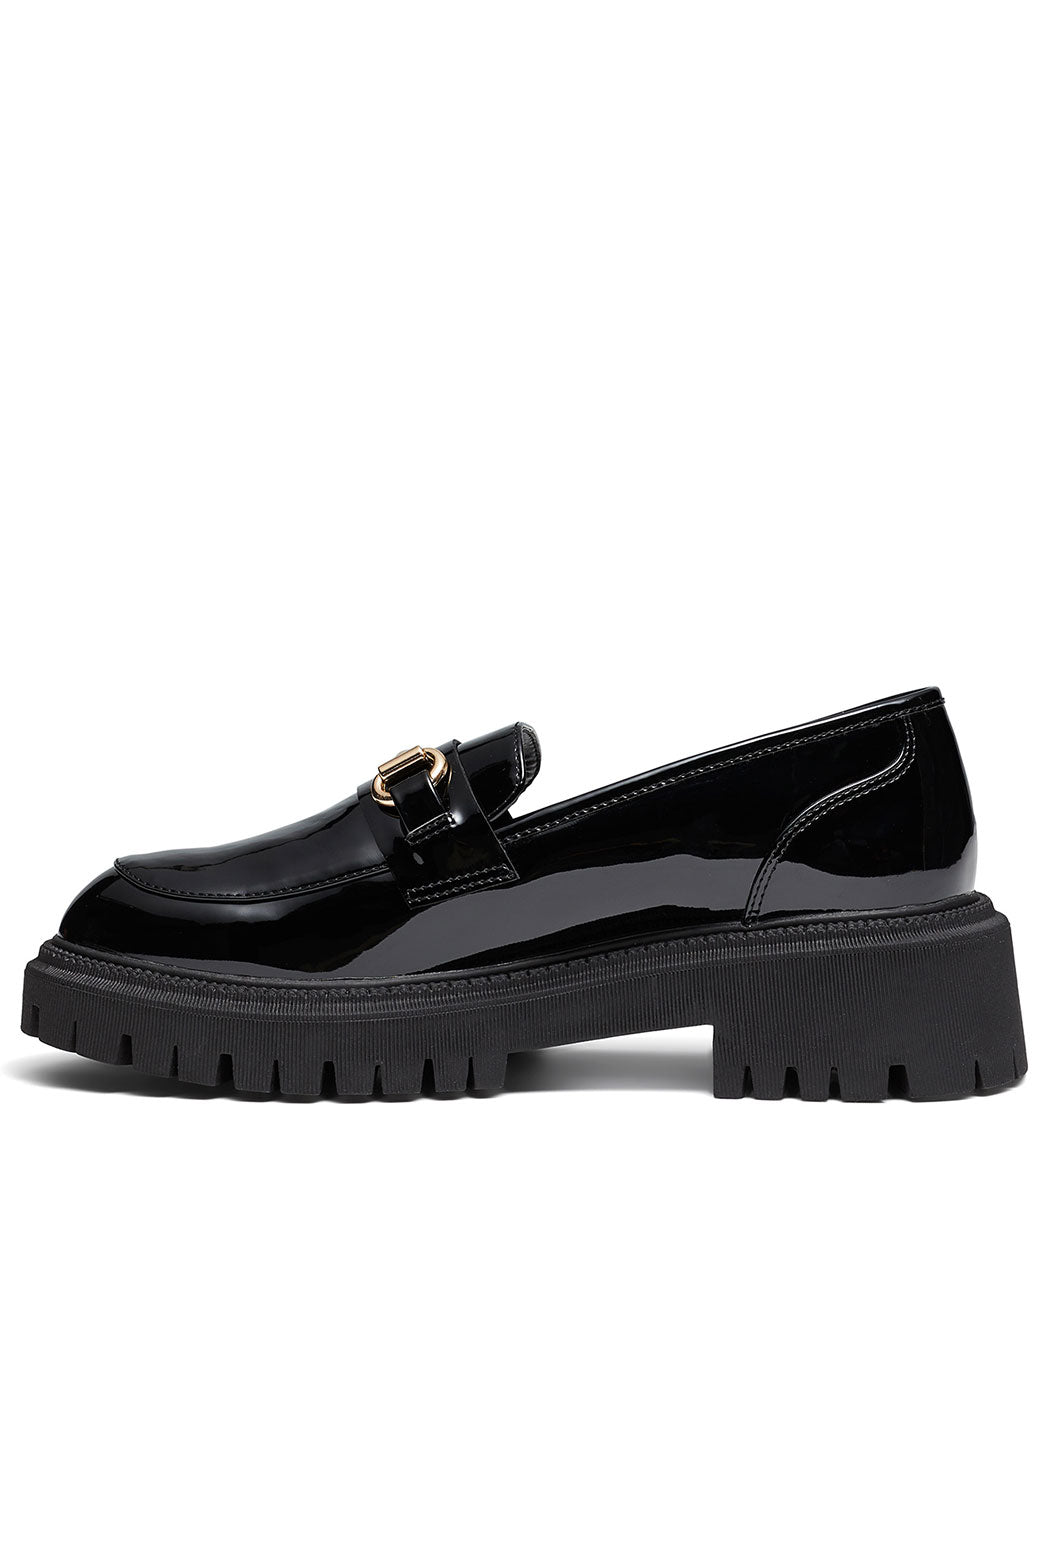 FINAL SALE Therapy Extra Loafers Black Patent